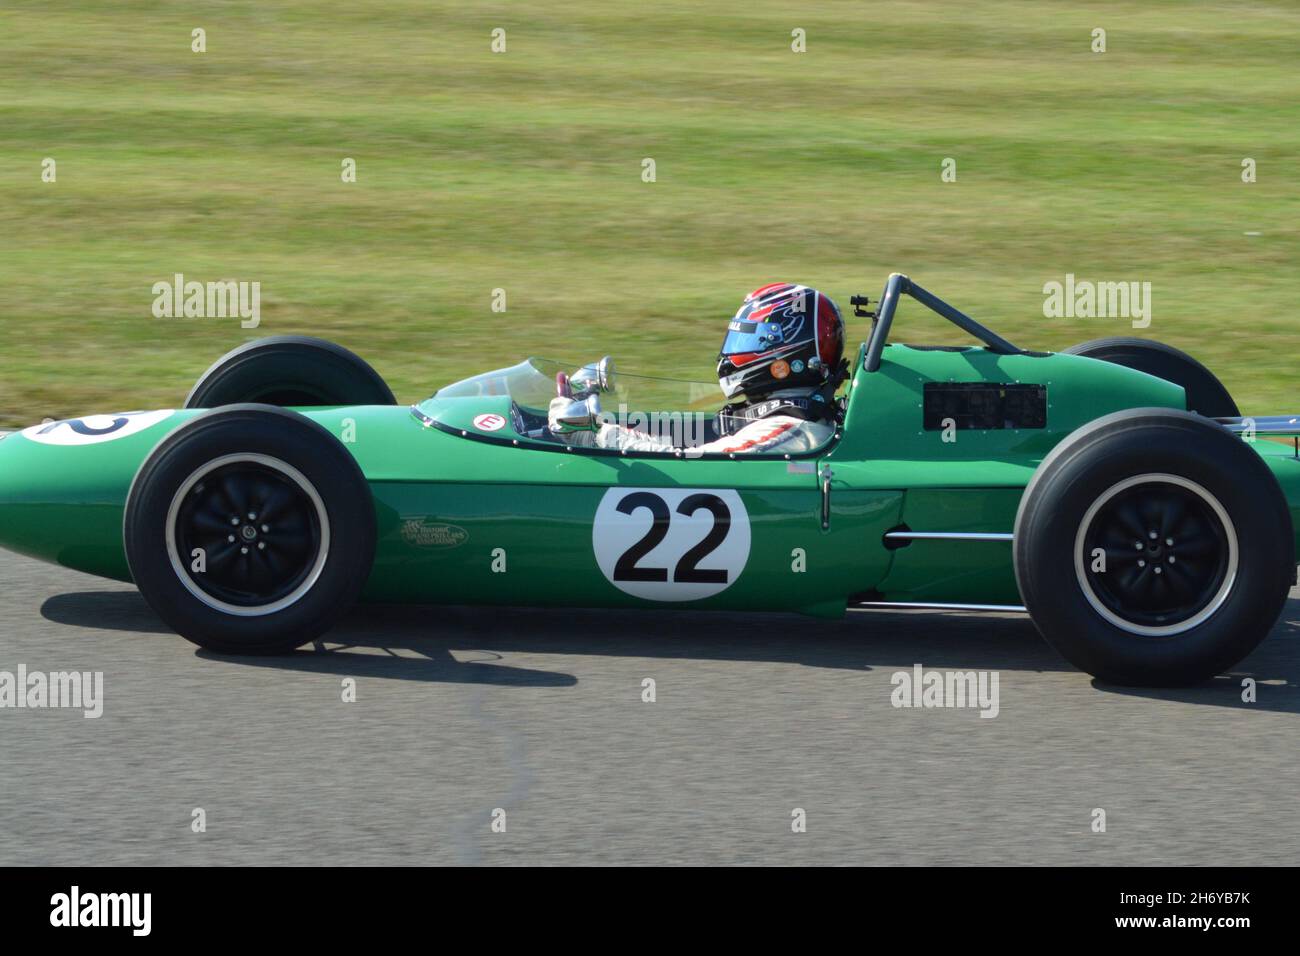 F1 1962 Lotus 24 Climax of  Stephan Jobstl Goodwood Revival  Sep 2021 Stock Photo